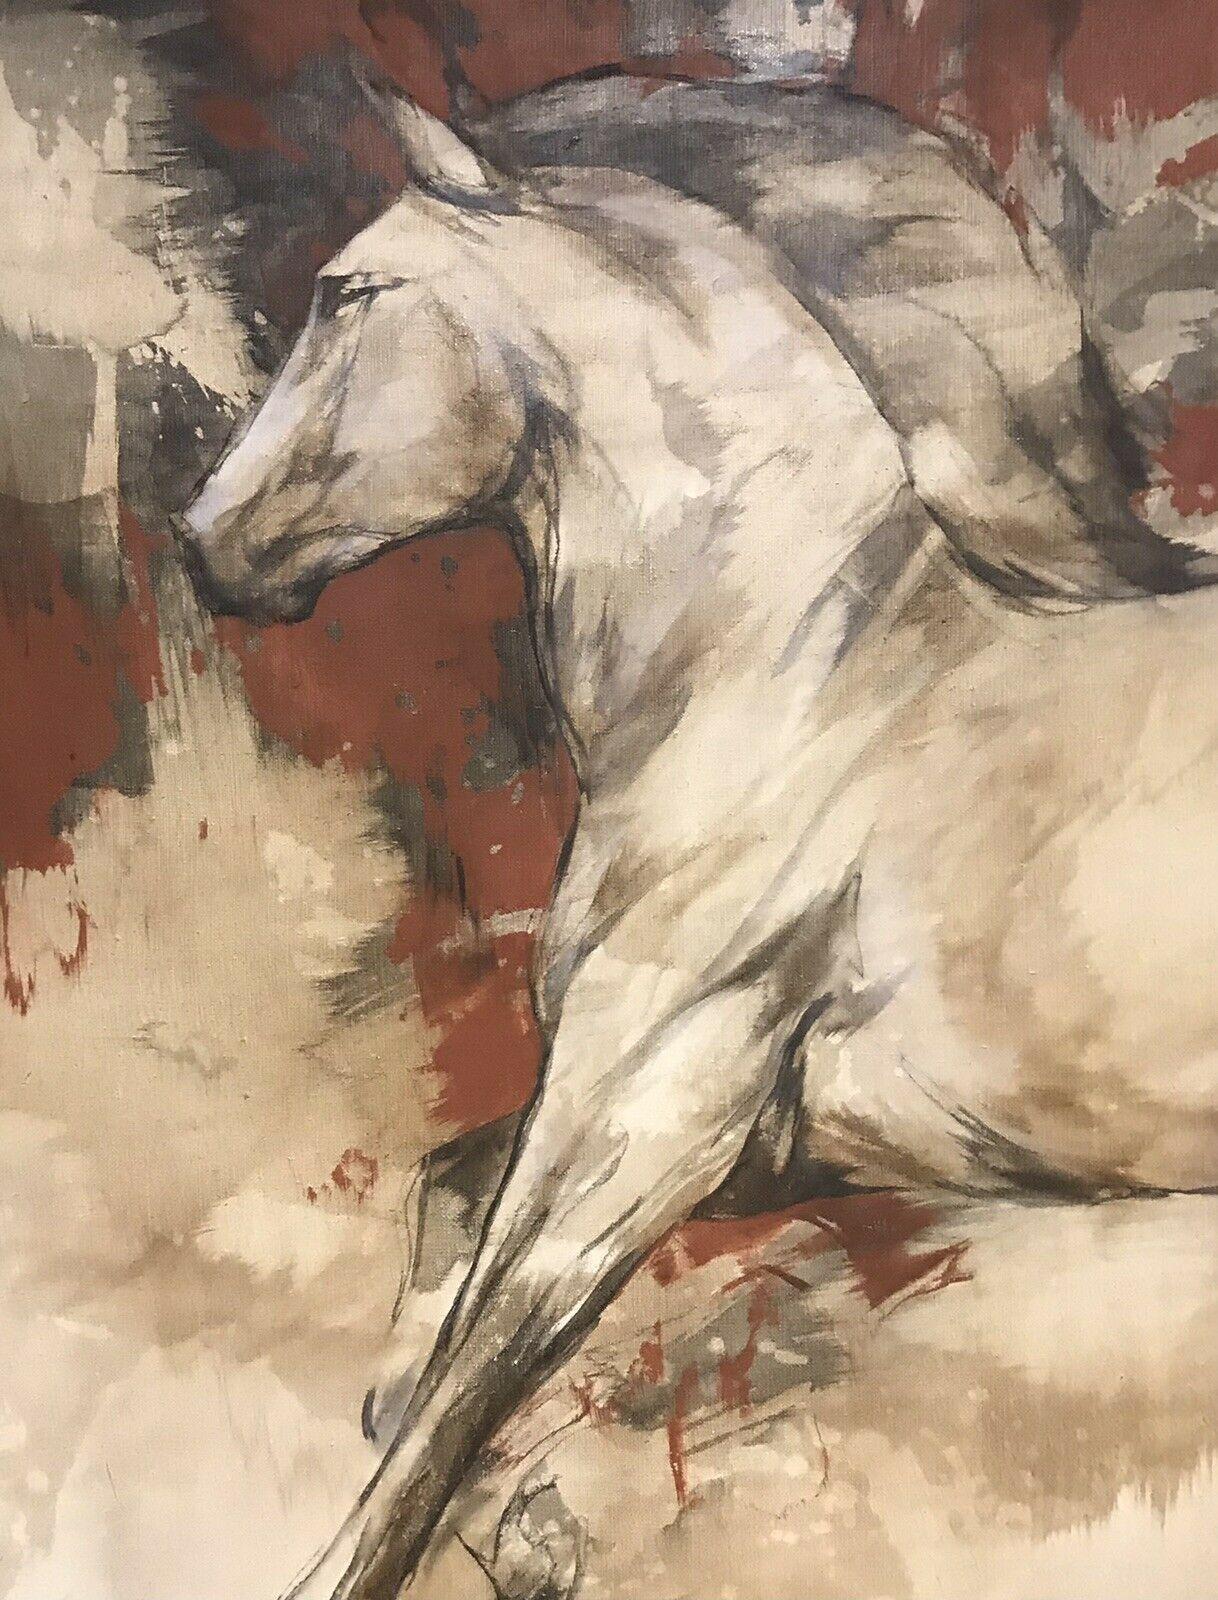 rtist/ School: by Cyril Reguerre (French, contemporary), signed verso, dated 2008

Title: Running Horses

Medium: oil painting, on canvas, unframed. 

Size: painting: 31.75 x 39.5 inches
        
Provenance: private collection, France

Condition: